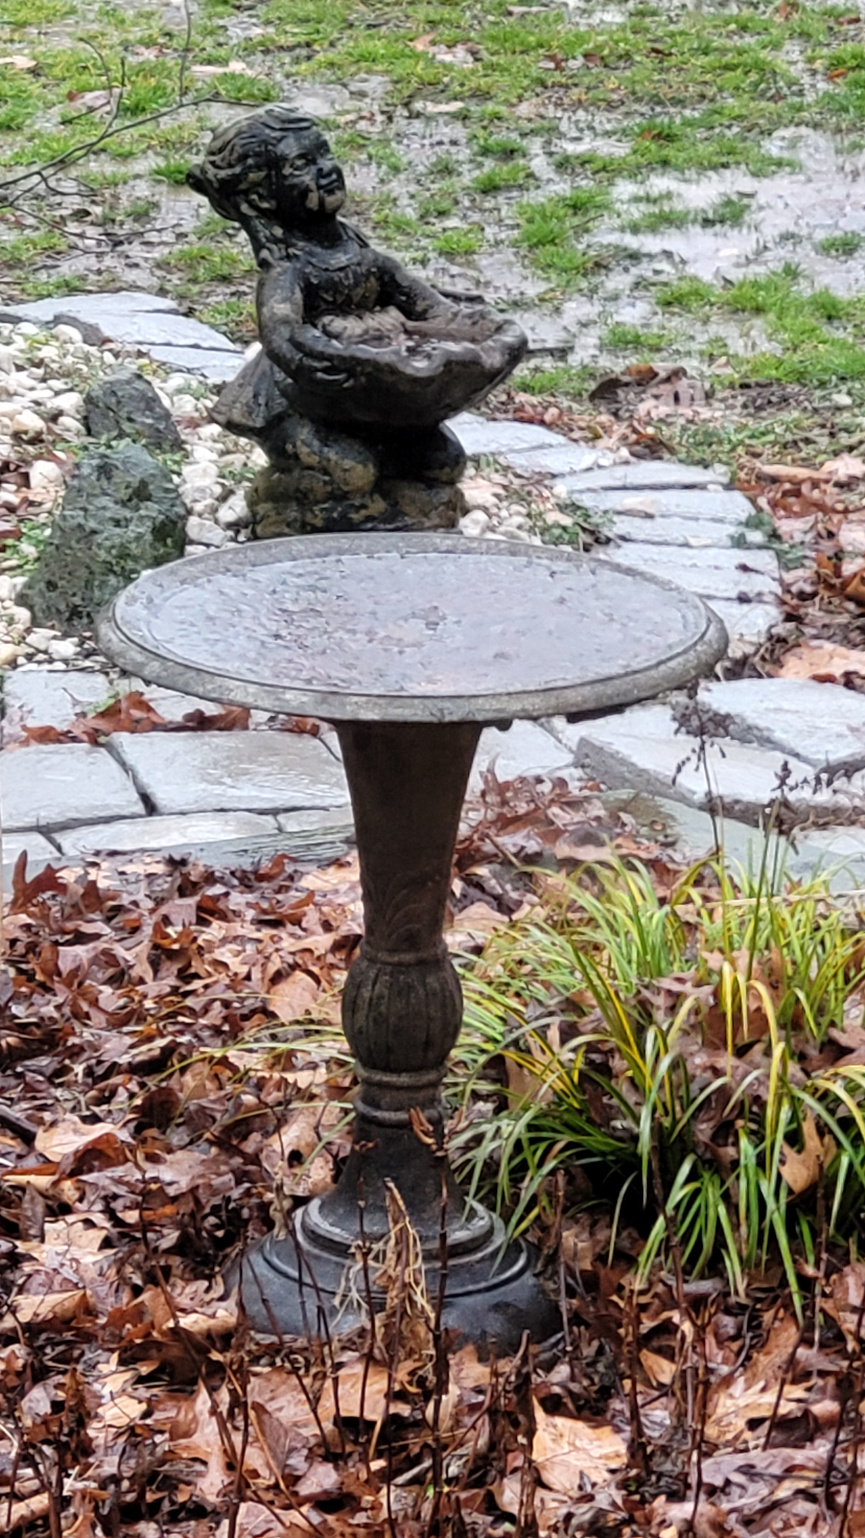 Birdbath and a statues in the wet